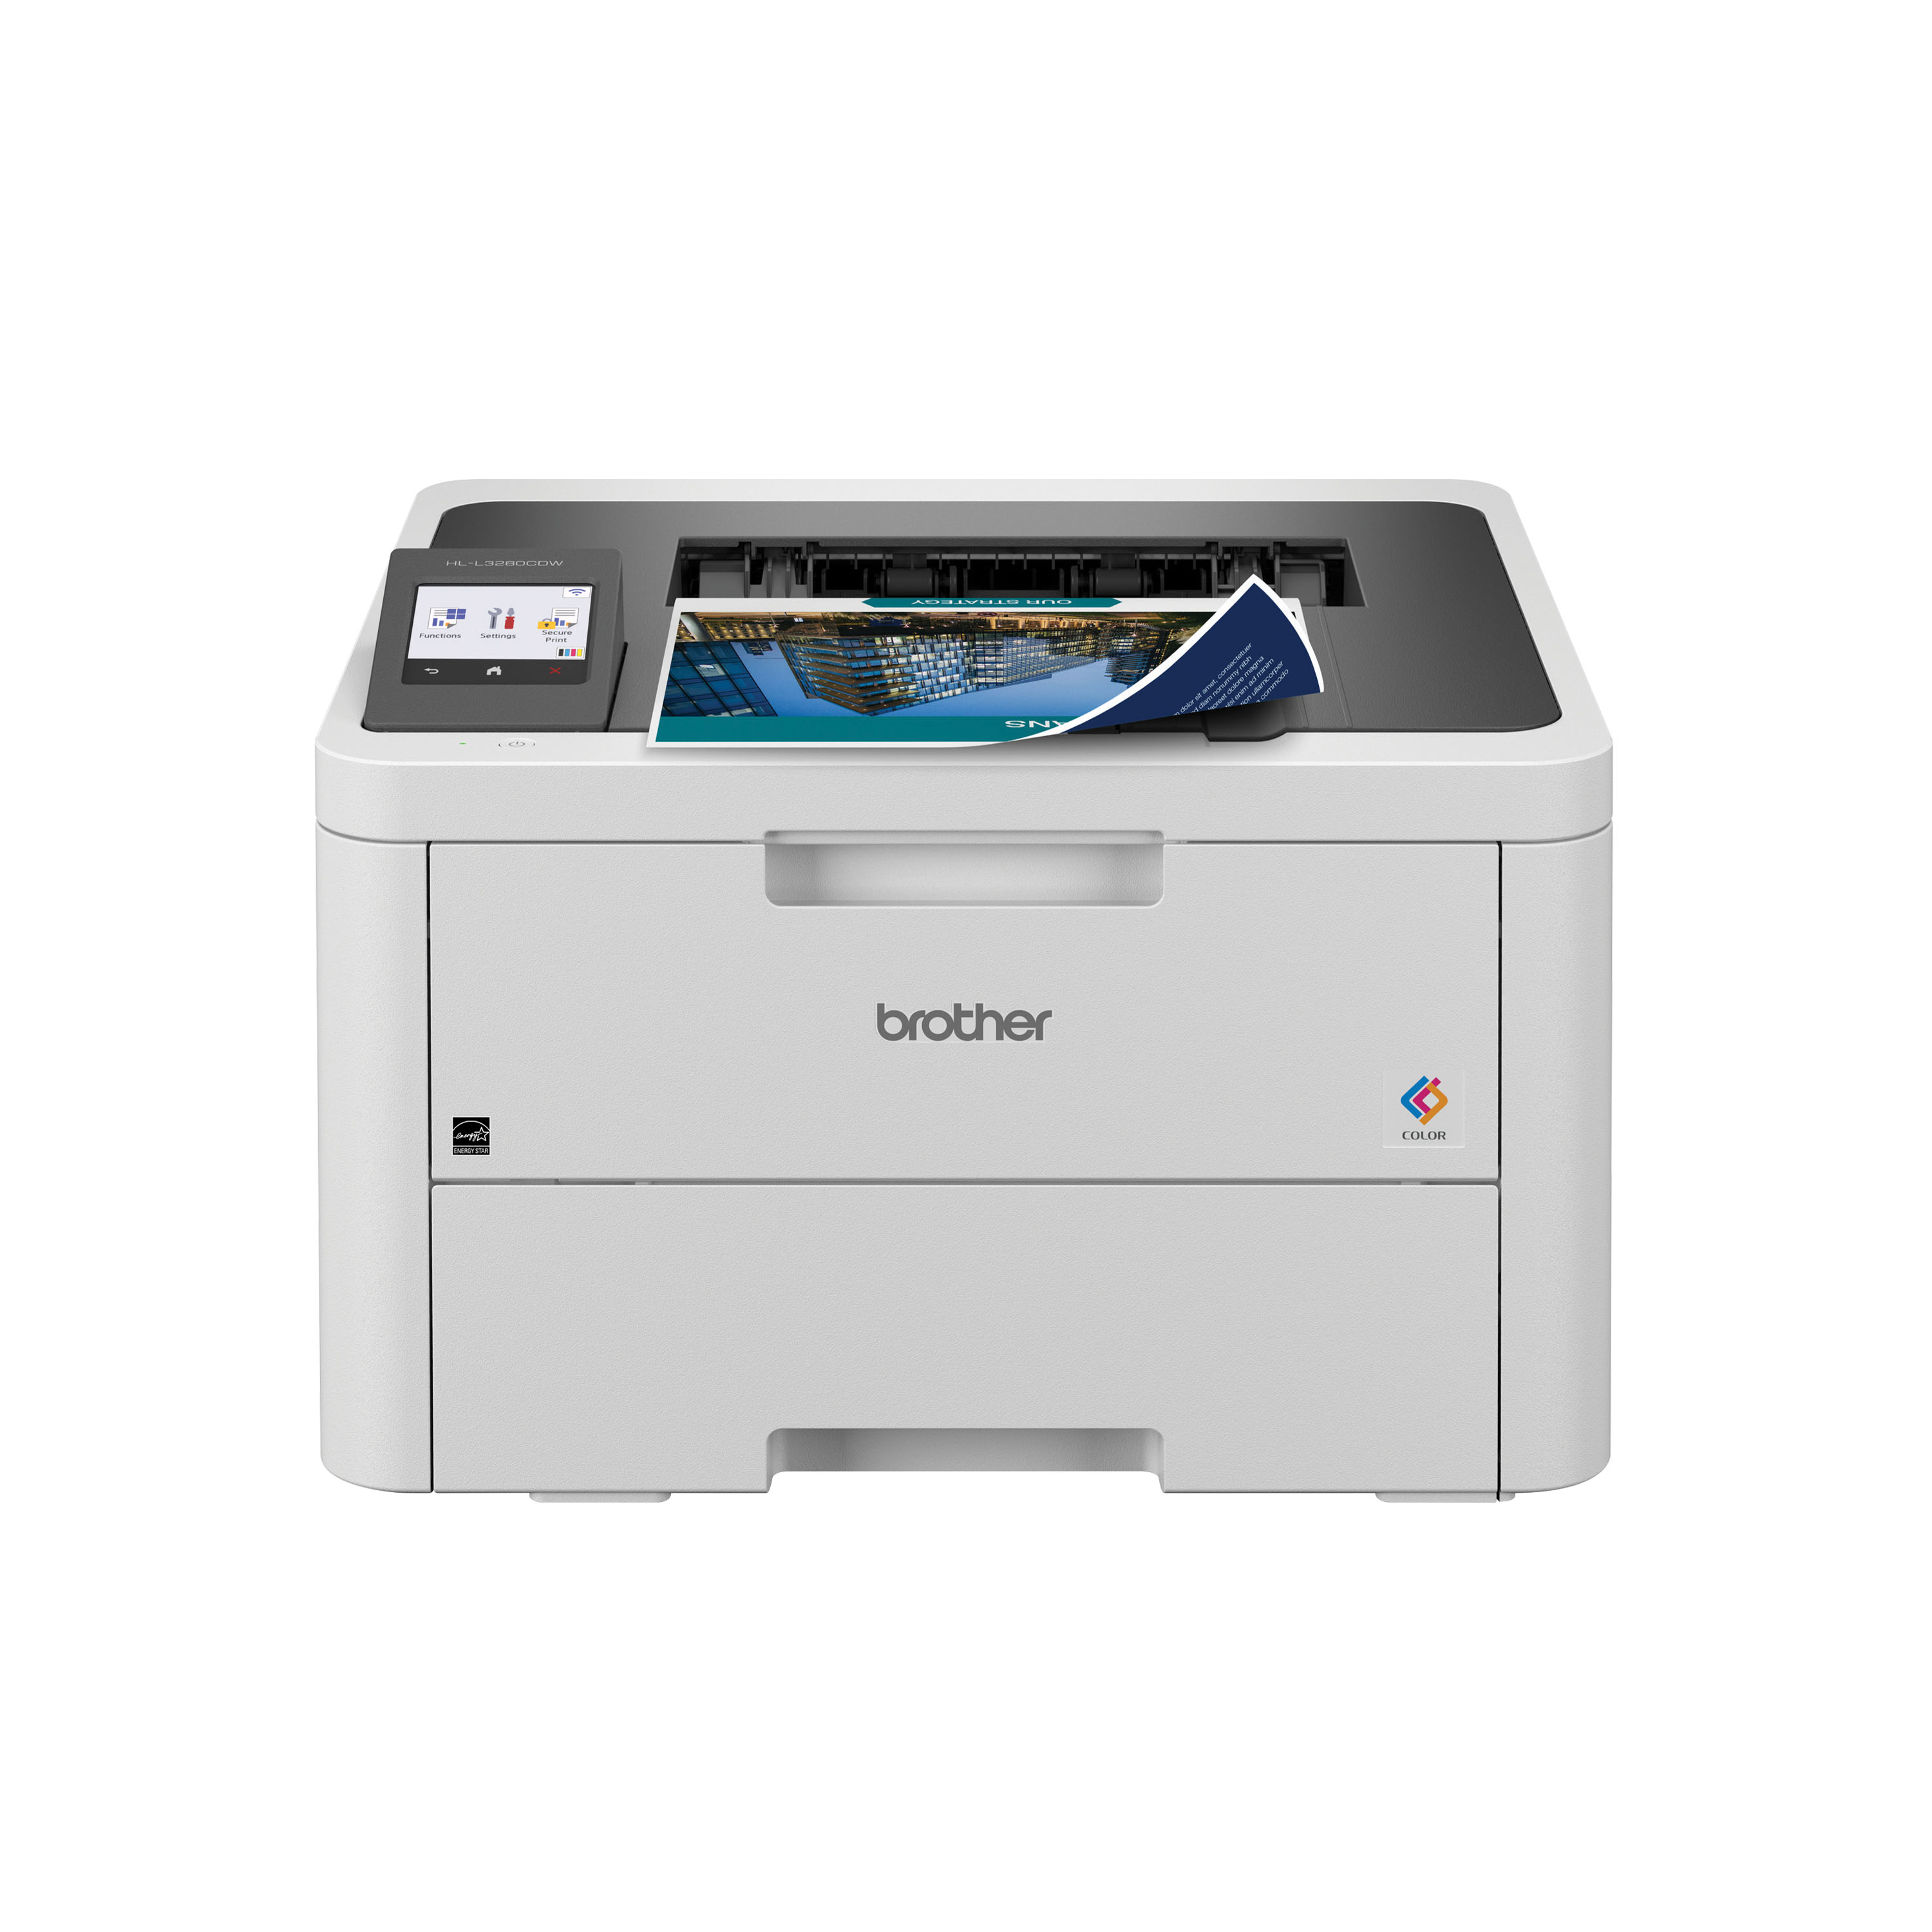 Photos - Printer Brother Color  with Laser Quality Output, Duplex and Mobile Printin 